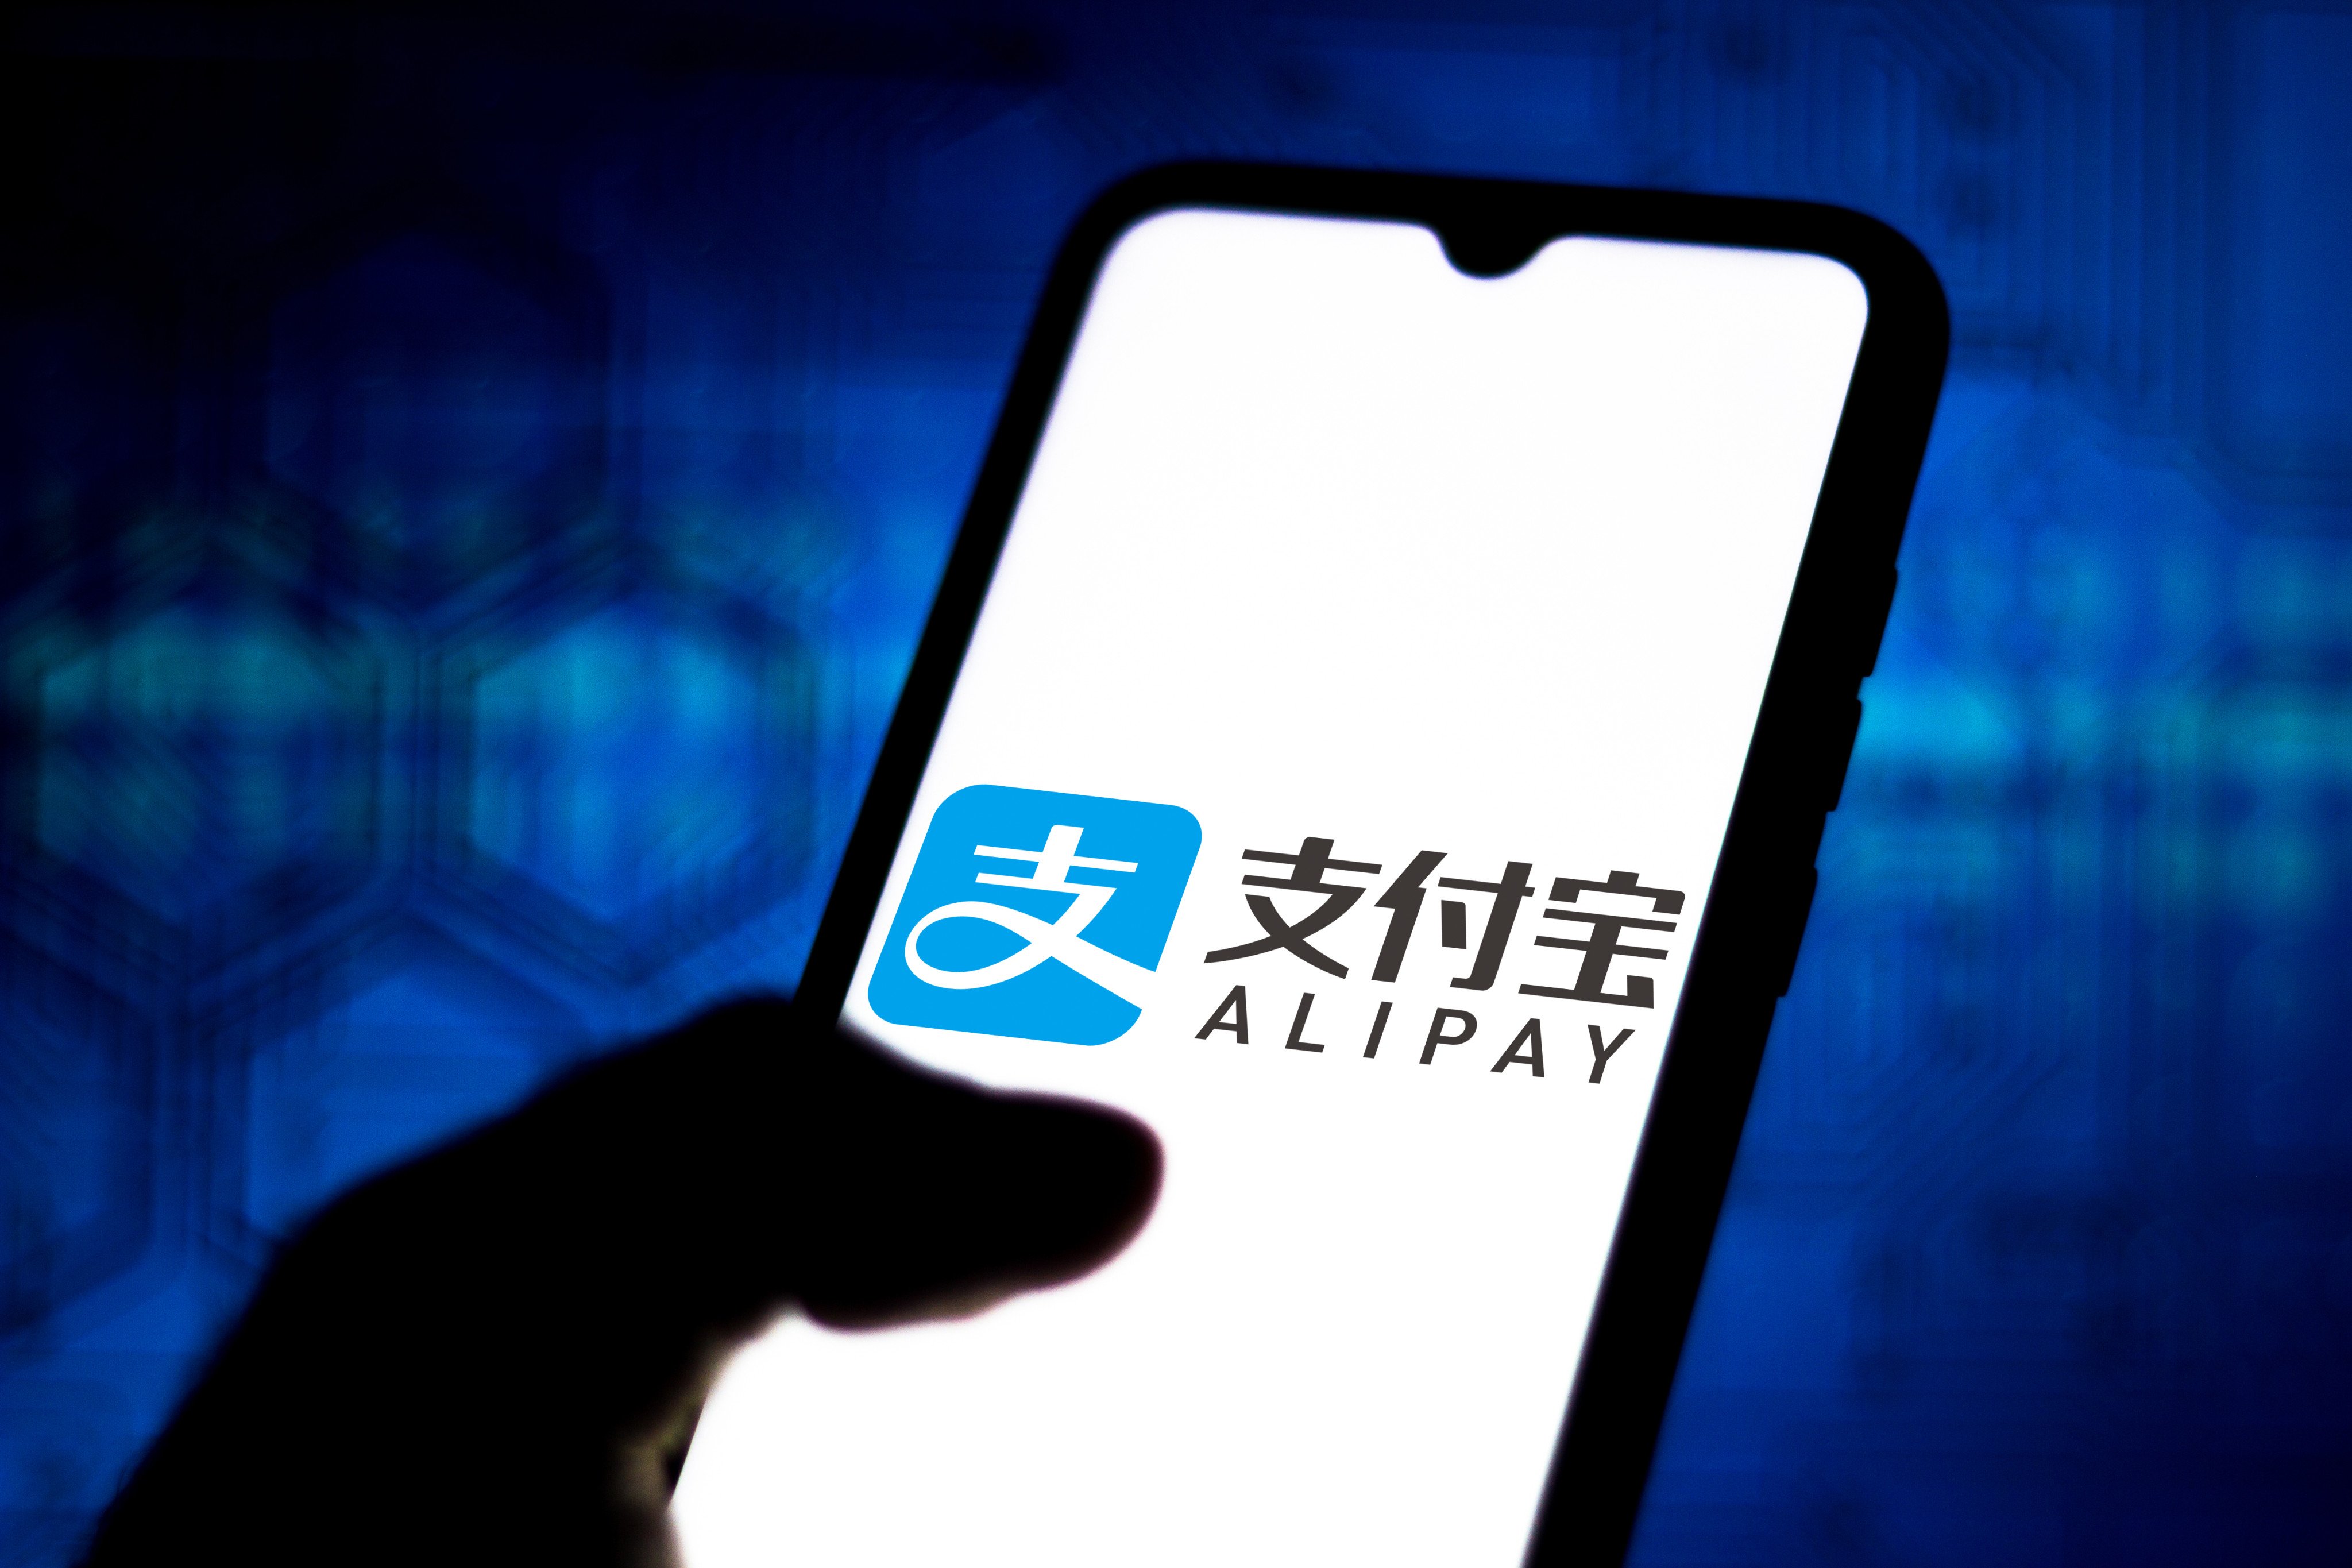 The division of Alipay owner Ant Group’s controlling stake previously held by founder Jack Ma among 10 people has been approved by the central bank, paving the way for the company’s highly anticipated IPO. Photo: Shutterstock